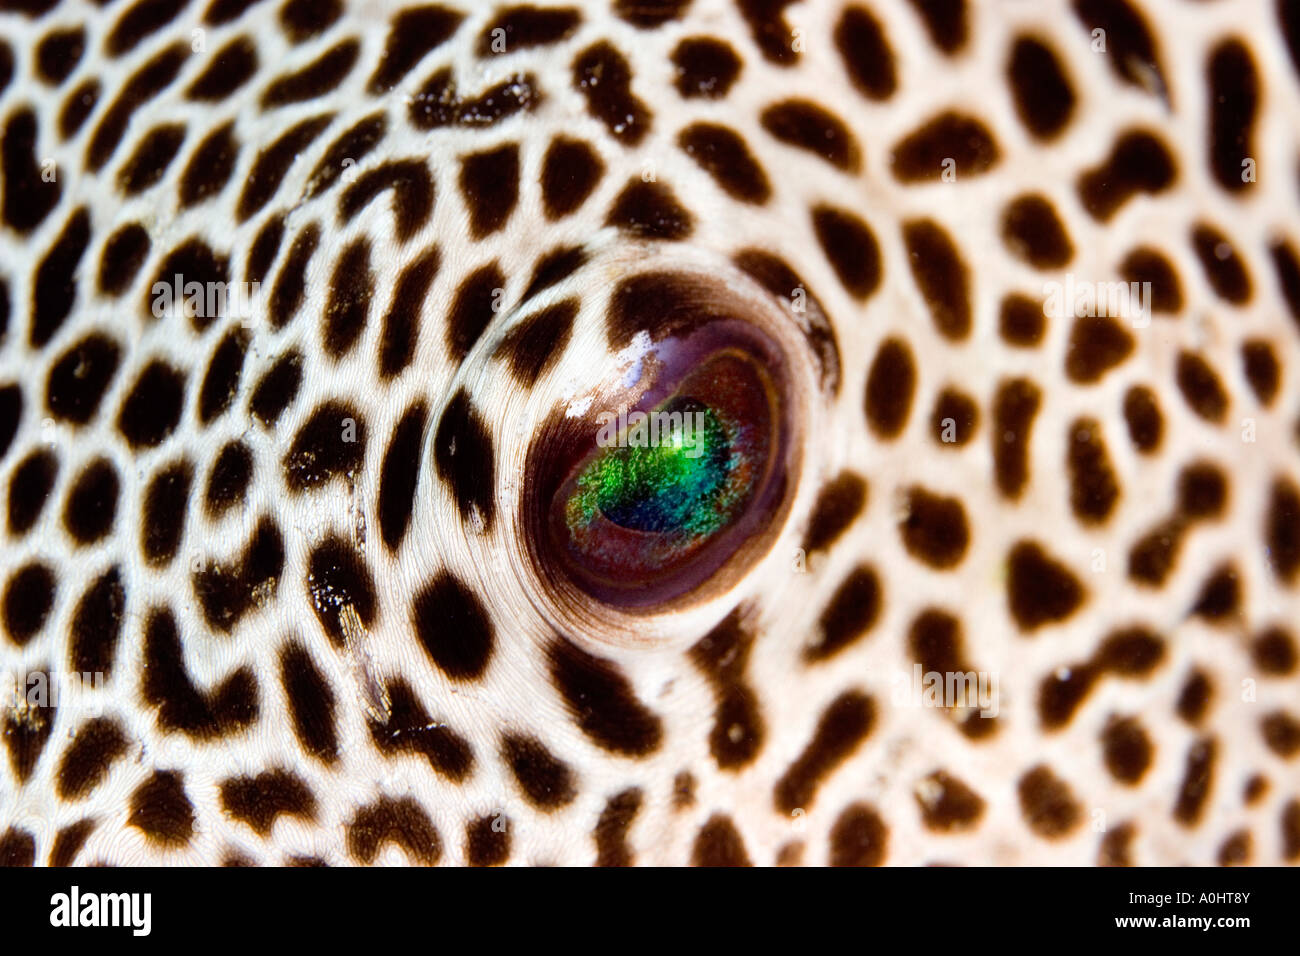 The eye of a Starry eyed Pufferfish in the Red Sea Photo by Adam Butler Stock Photo